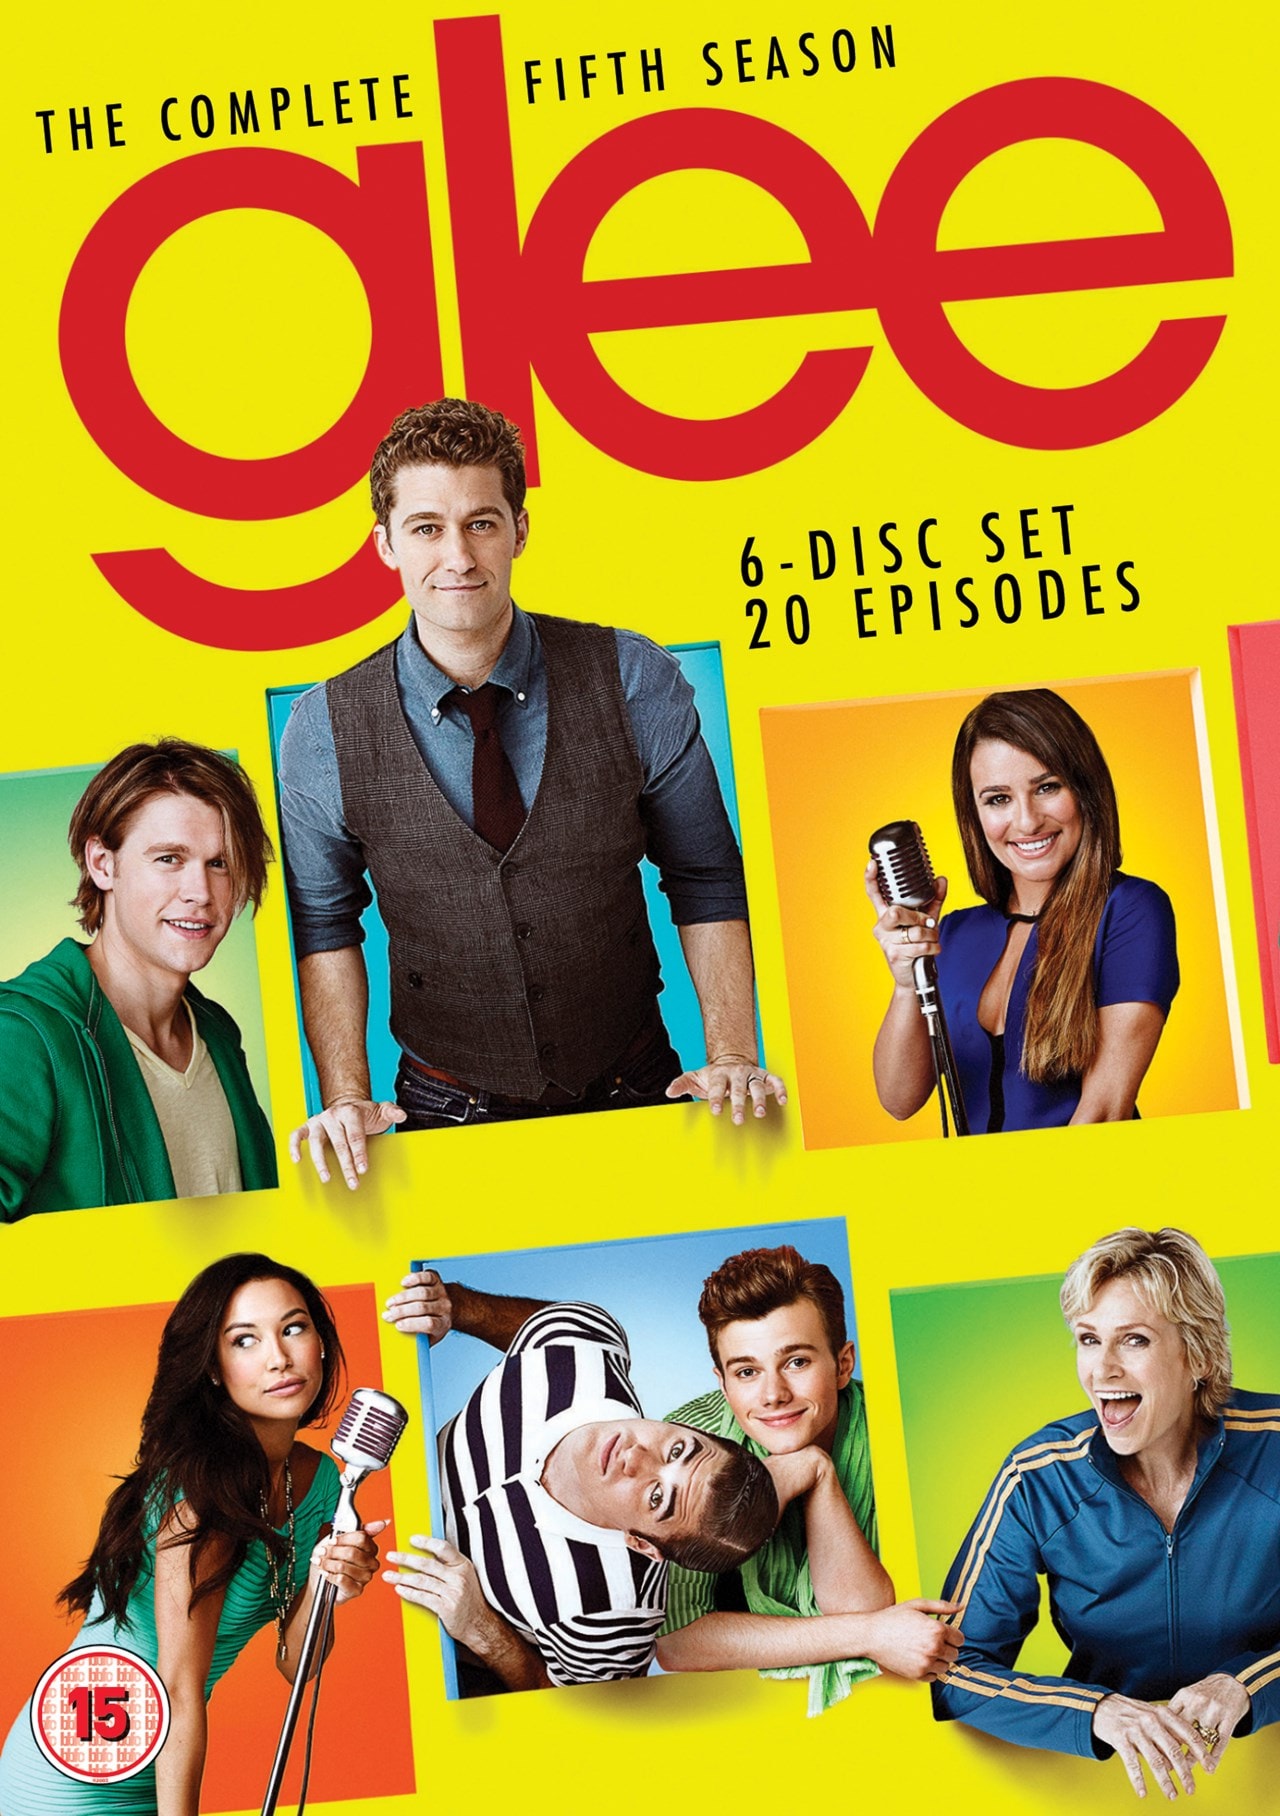 Glee The Complete Fifth Season Dvd Box Set Free Shipping Over Hmv Store